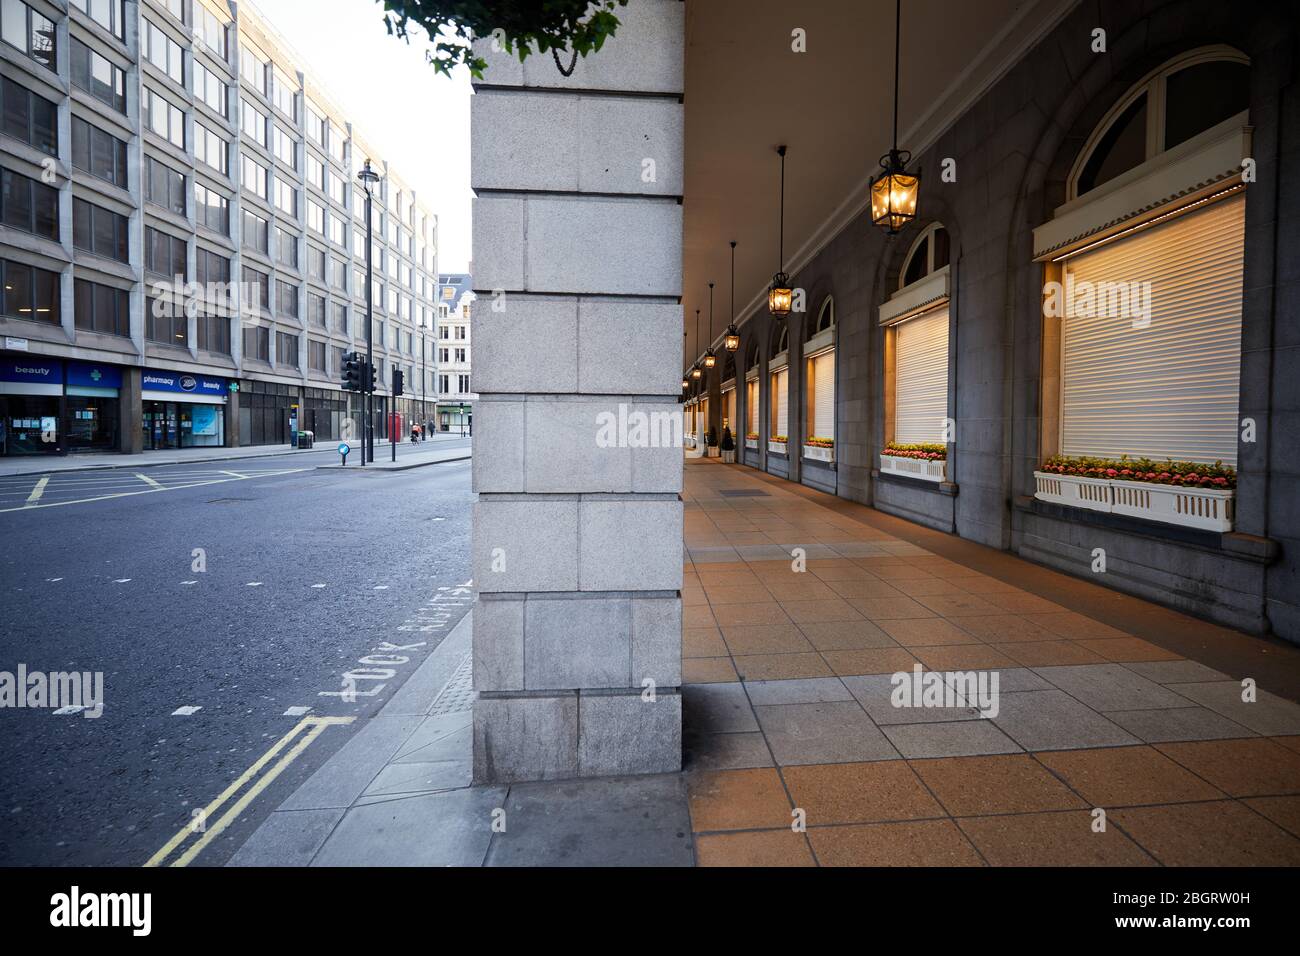 London, U.K. - 22 Apr 2020: The Ritz arcade and part  of a deserted Piccadilly during the coronavirus lockdown. Stock Photo